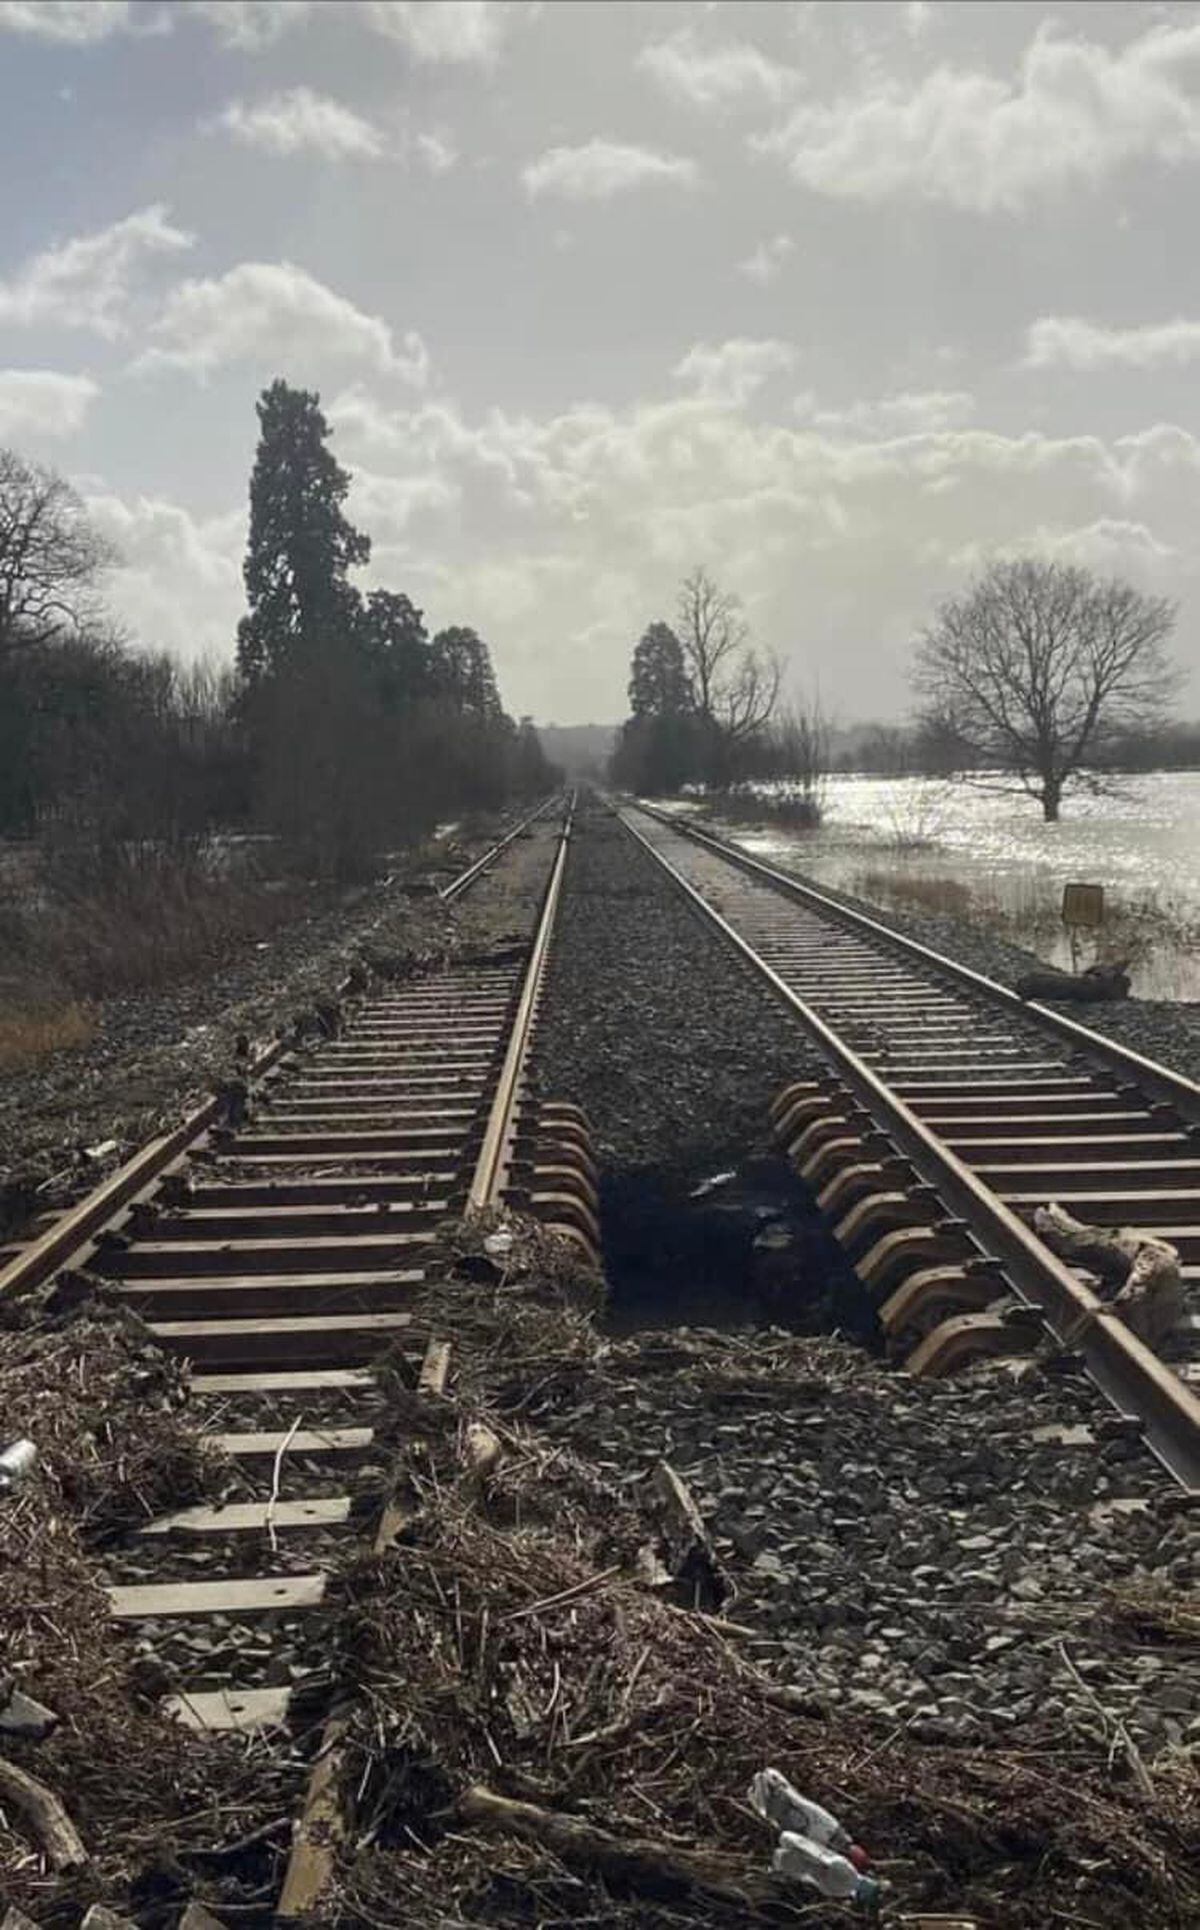 A section of railway track just outside Welshpool Railway station where the earth was washed away by flood water